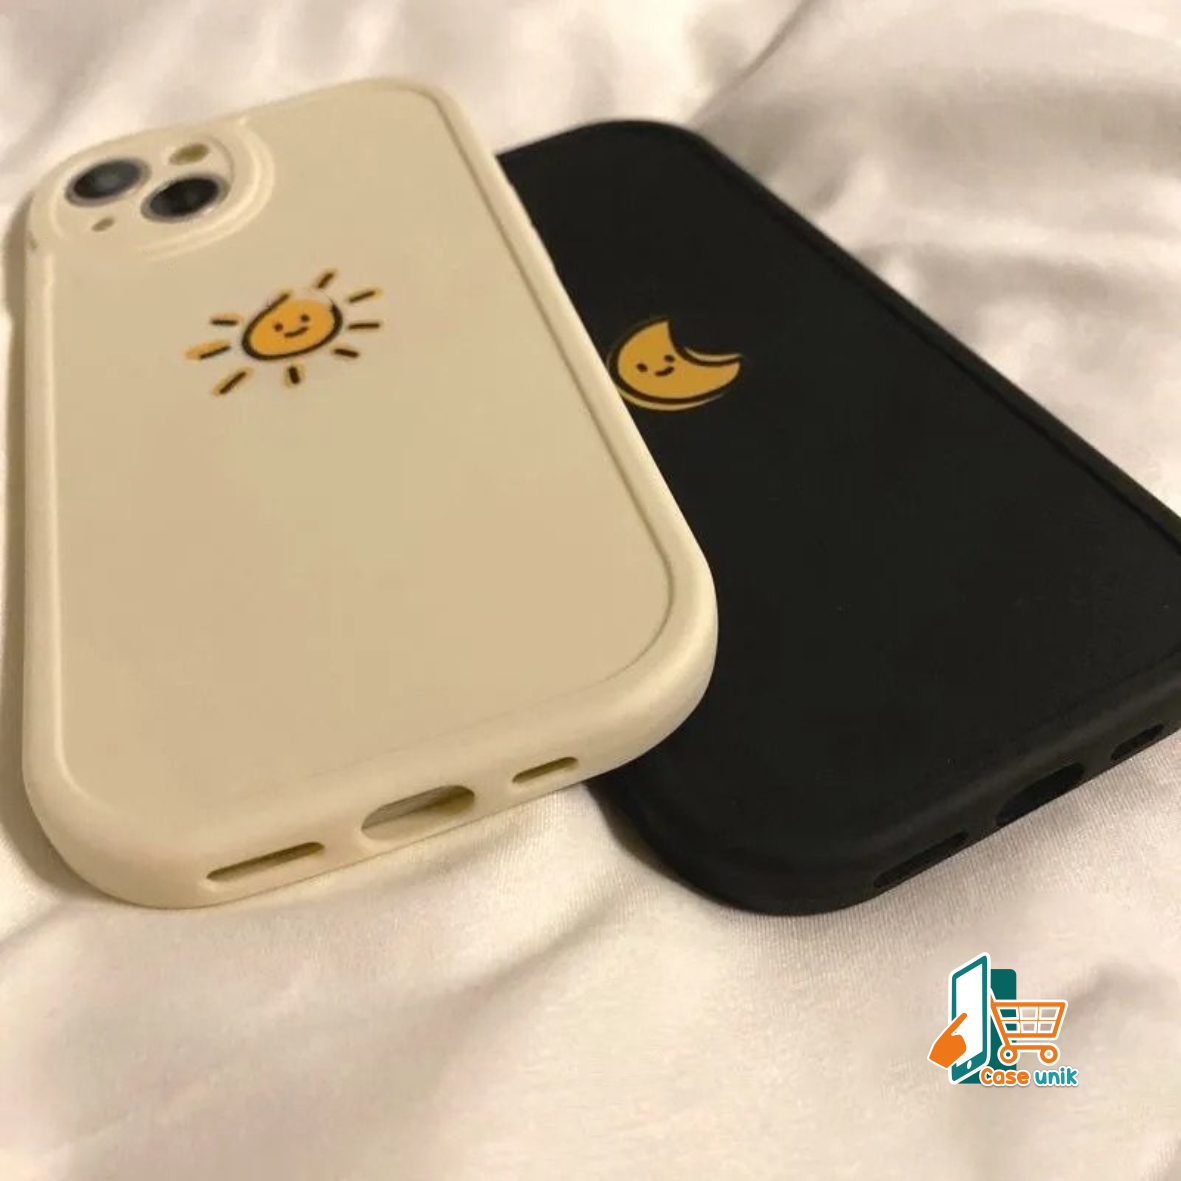 SS822 CASING SOFTCASE SILIKON COUPLES OVAL FOR XIAOMI REDMI 9 A1 A2 4A 5A 5+ 6A 8 8A 9A 9C 10A 9T 10 10C C40 12C 11A 12T PRO CS5780